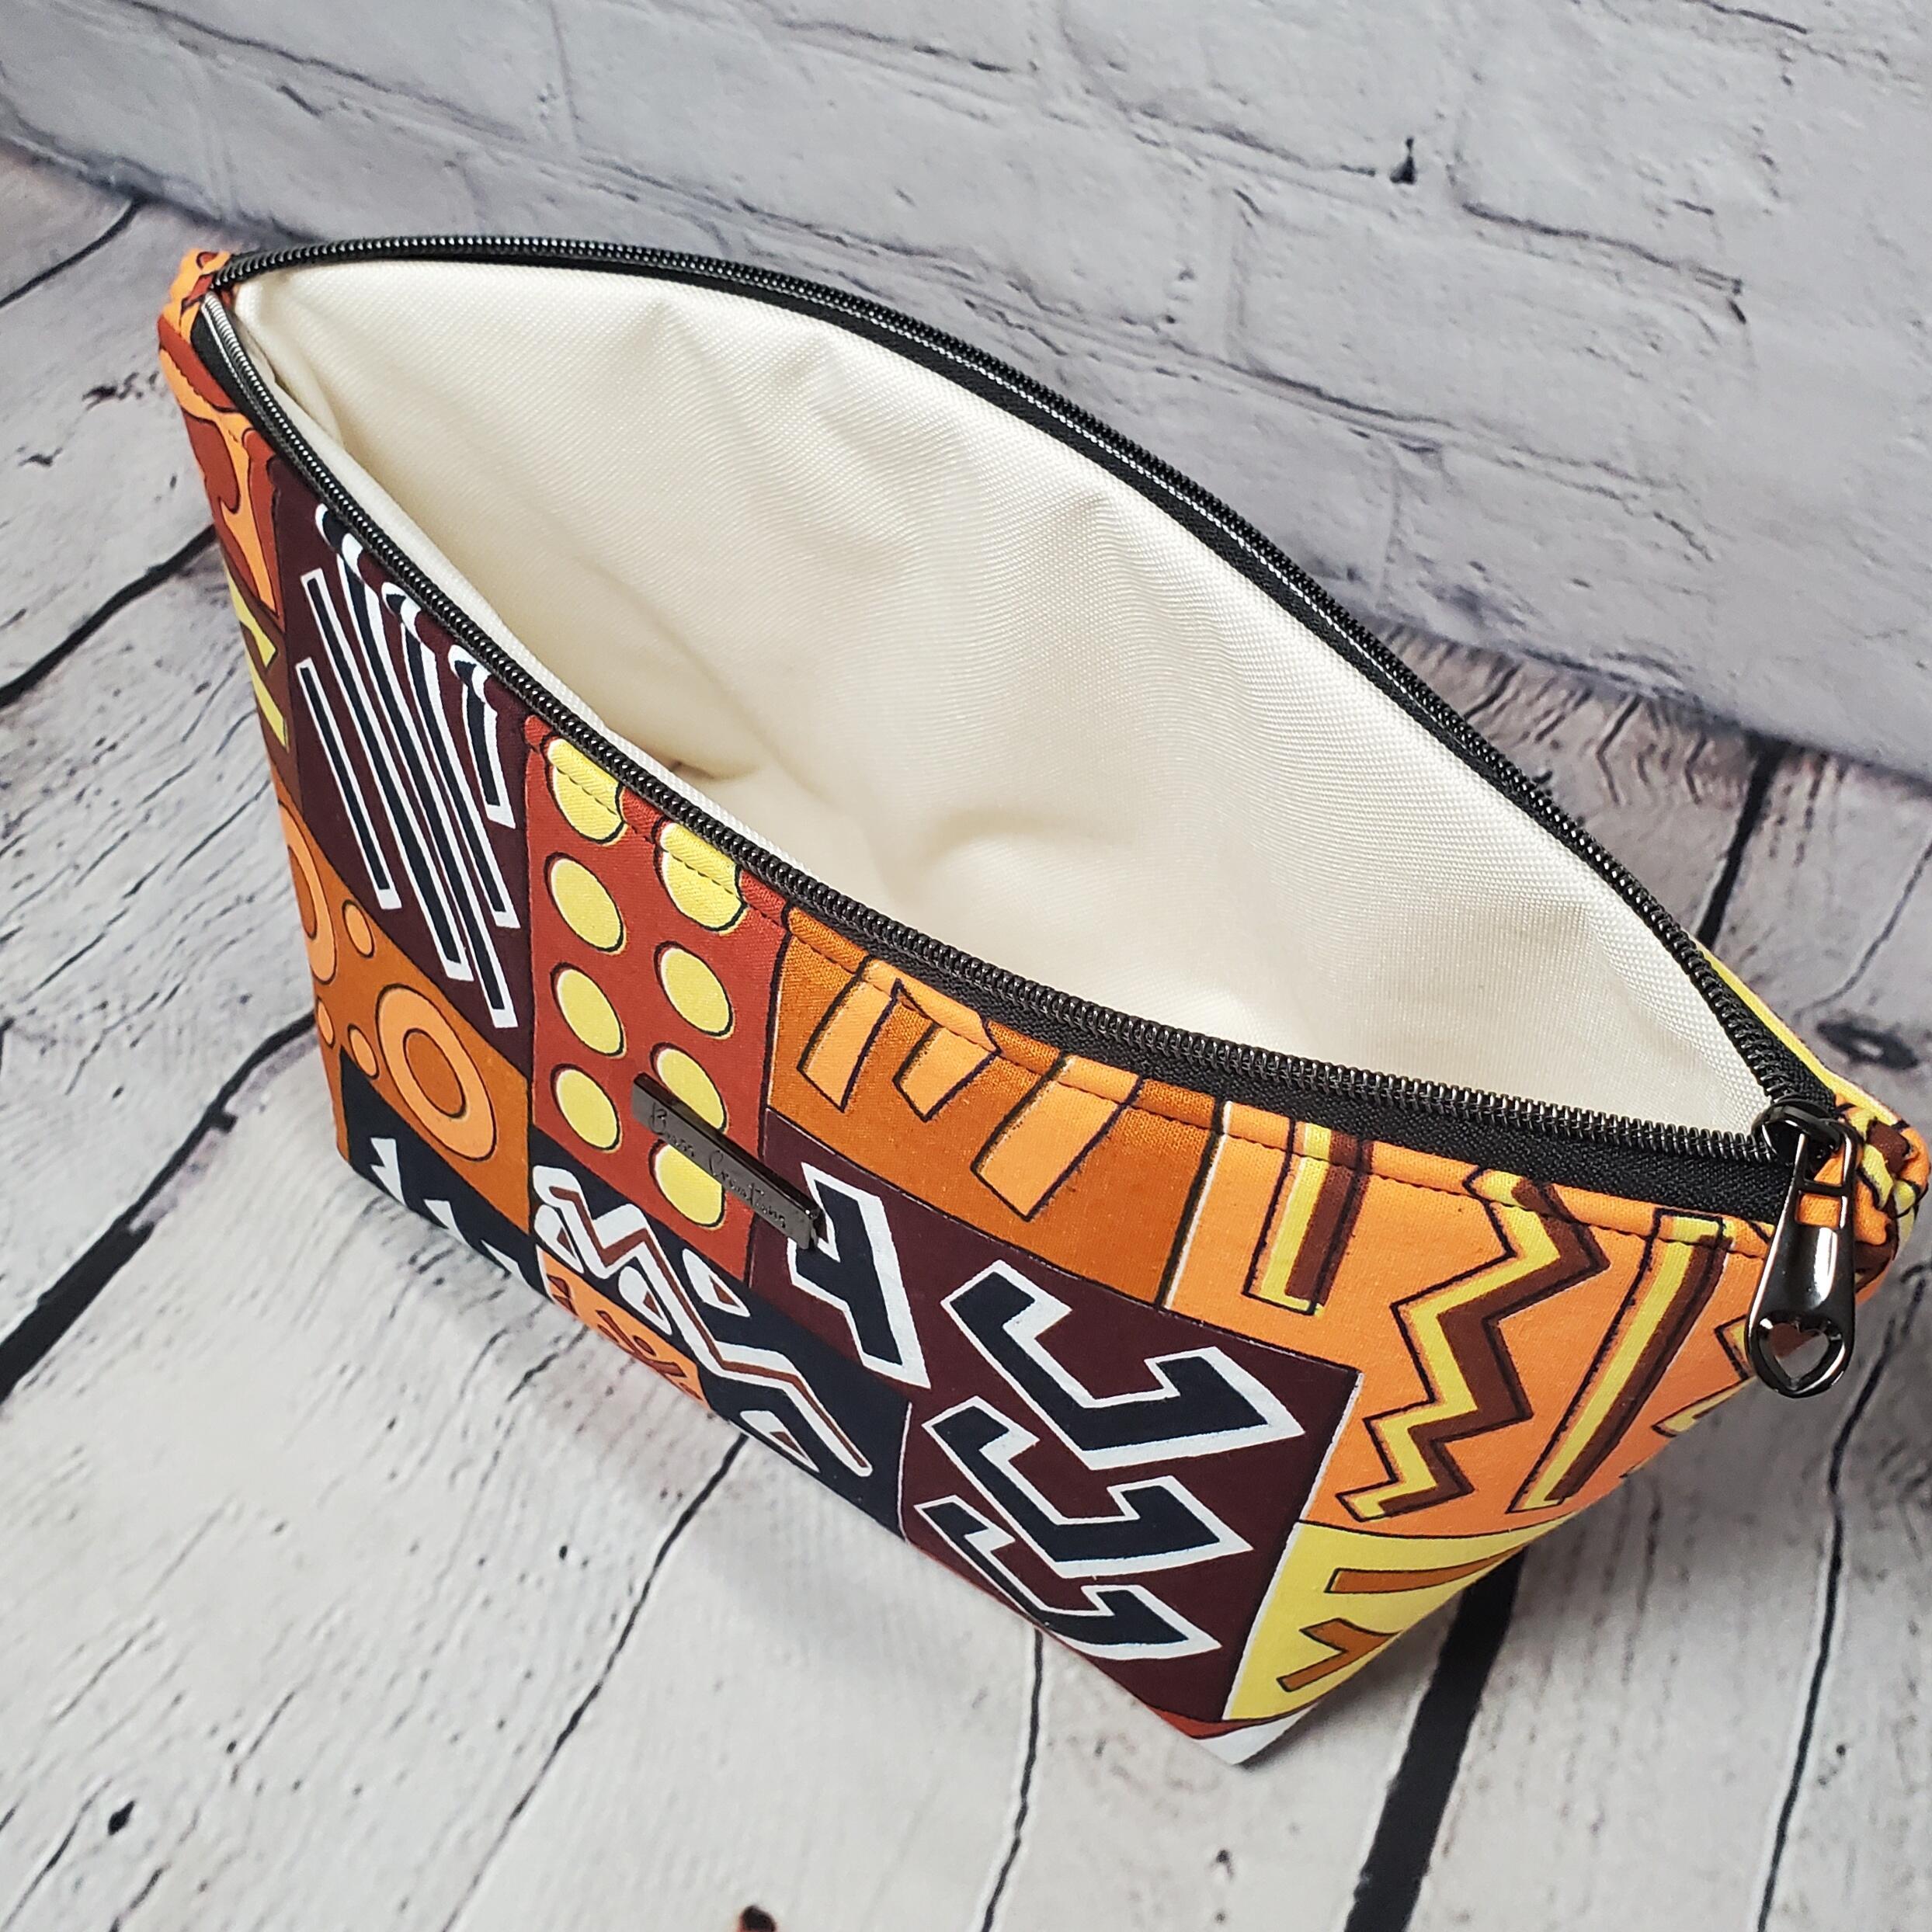 Top view of a brown orange and yellow geometric African print cosmetic bag with a gunmetal zipper, ivory interior waterproof canvas lining and a gunmetal Bass Creations logo.